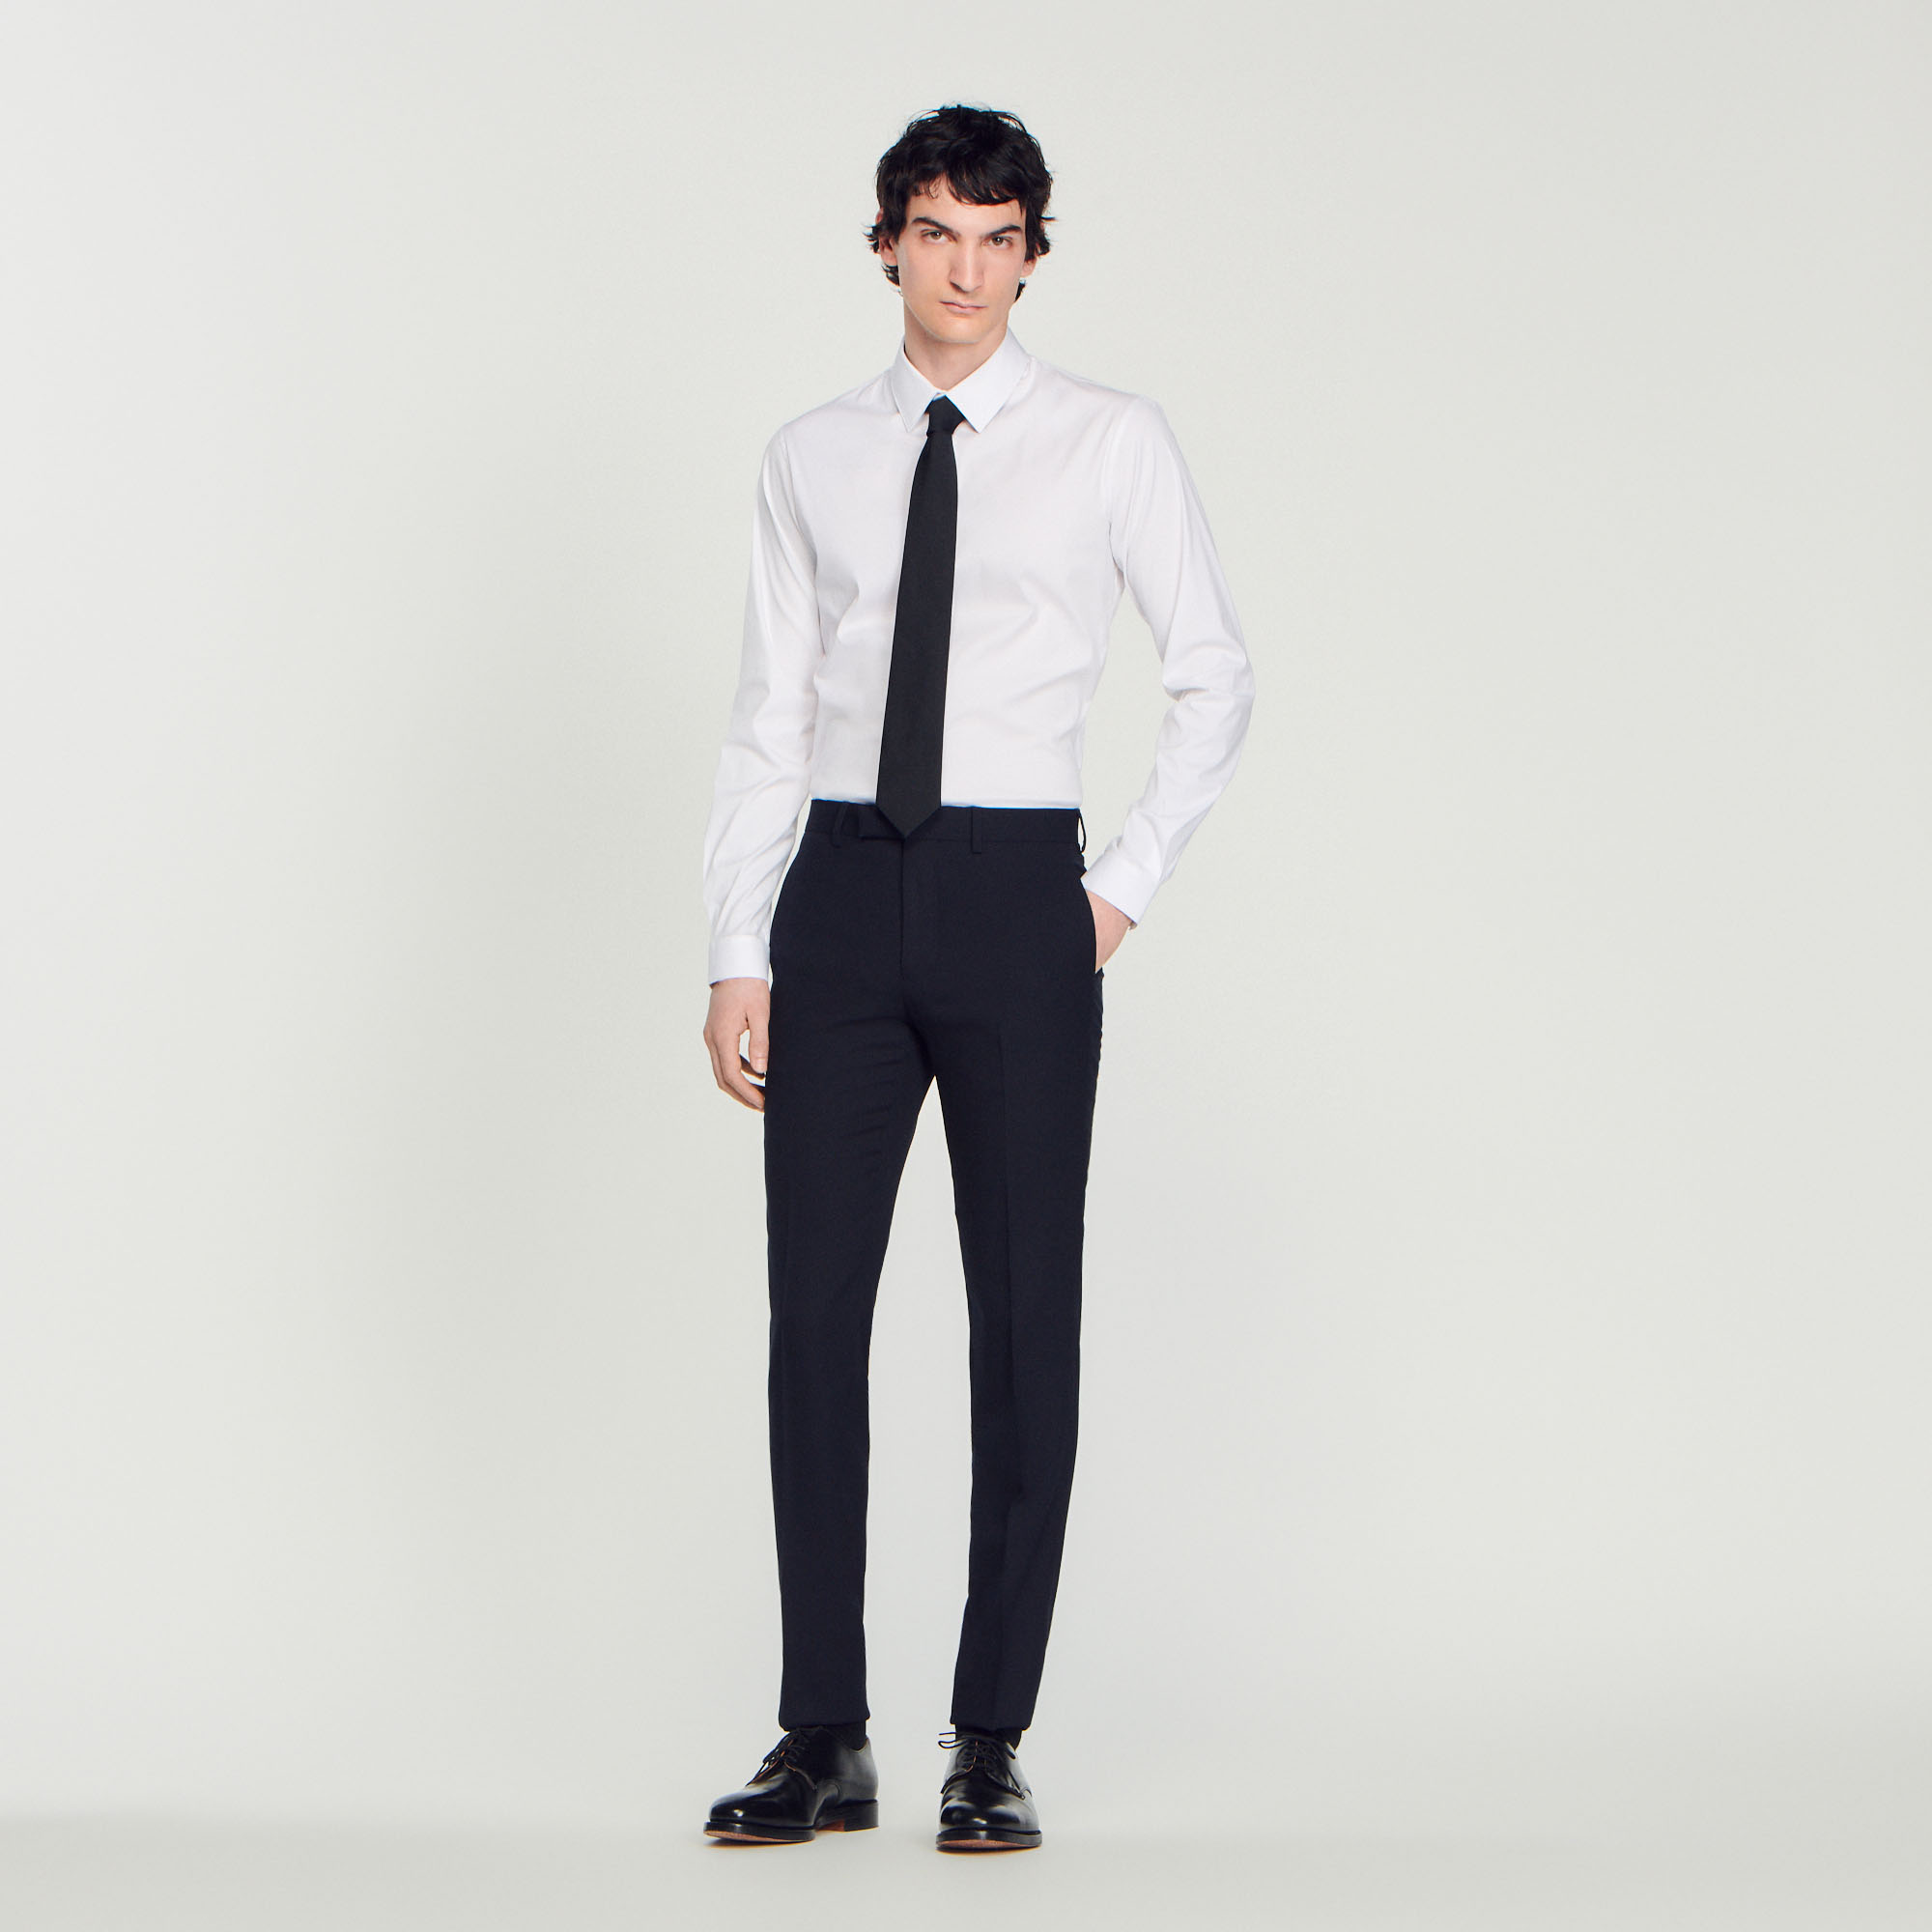 Sandro wool Sandro men's pants â€¢ Wool suit pants â€¢ Waistband with belt loops â€¢ Pockets at the sides â€¢ Piped pockets at the back â€¢ These pants match the jacket Model is wearing a size 38 and is 6'1'' Occasionally, a few alterations may be necessary to make the suit fit perfectly